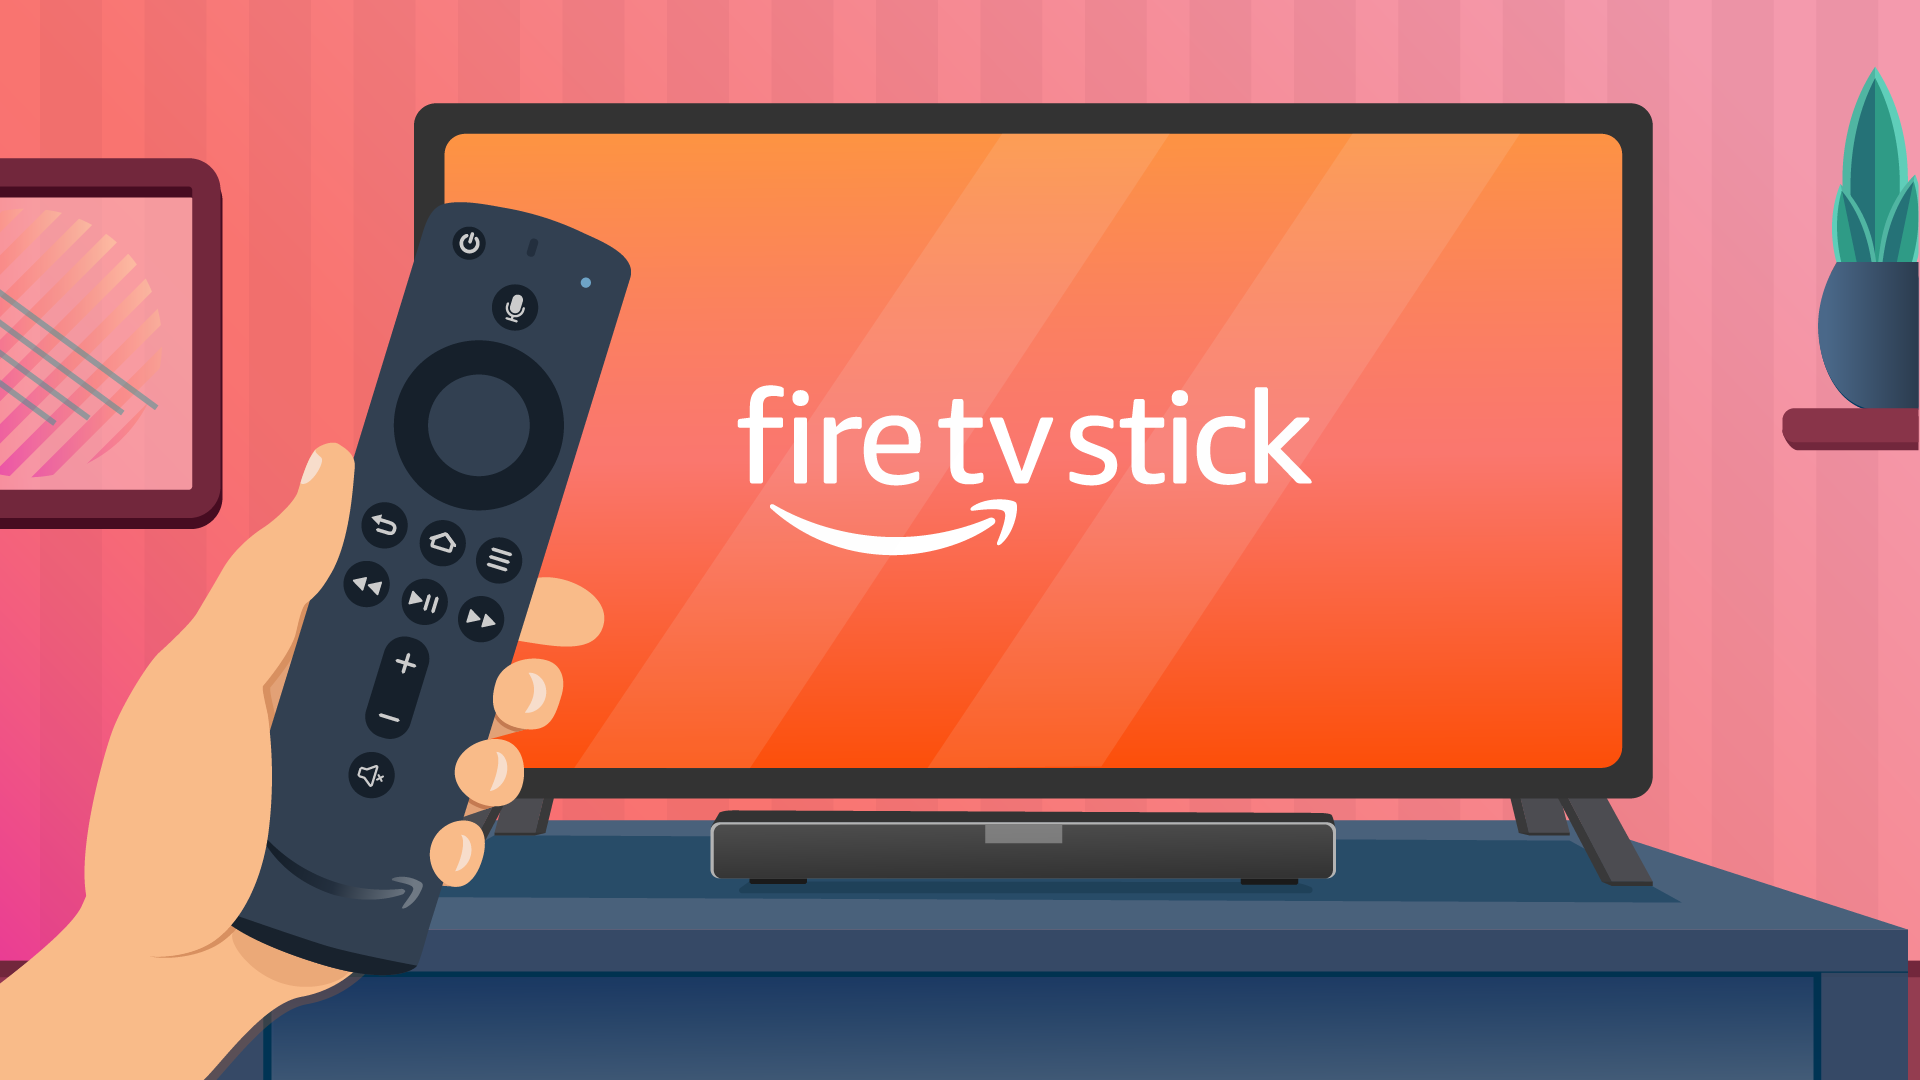 Fire TV Stick, now with power and volume control by Gabriel Mas Amazon Fire TV